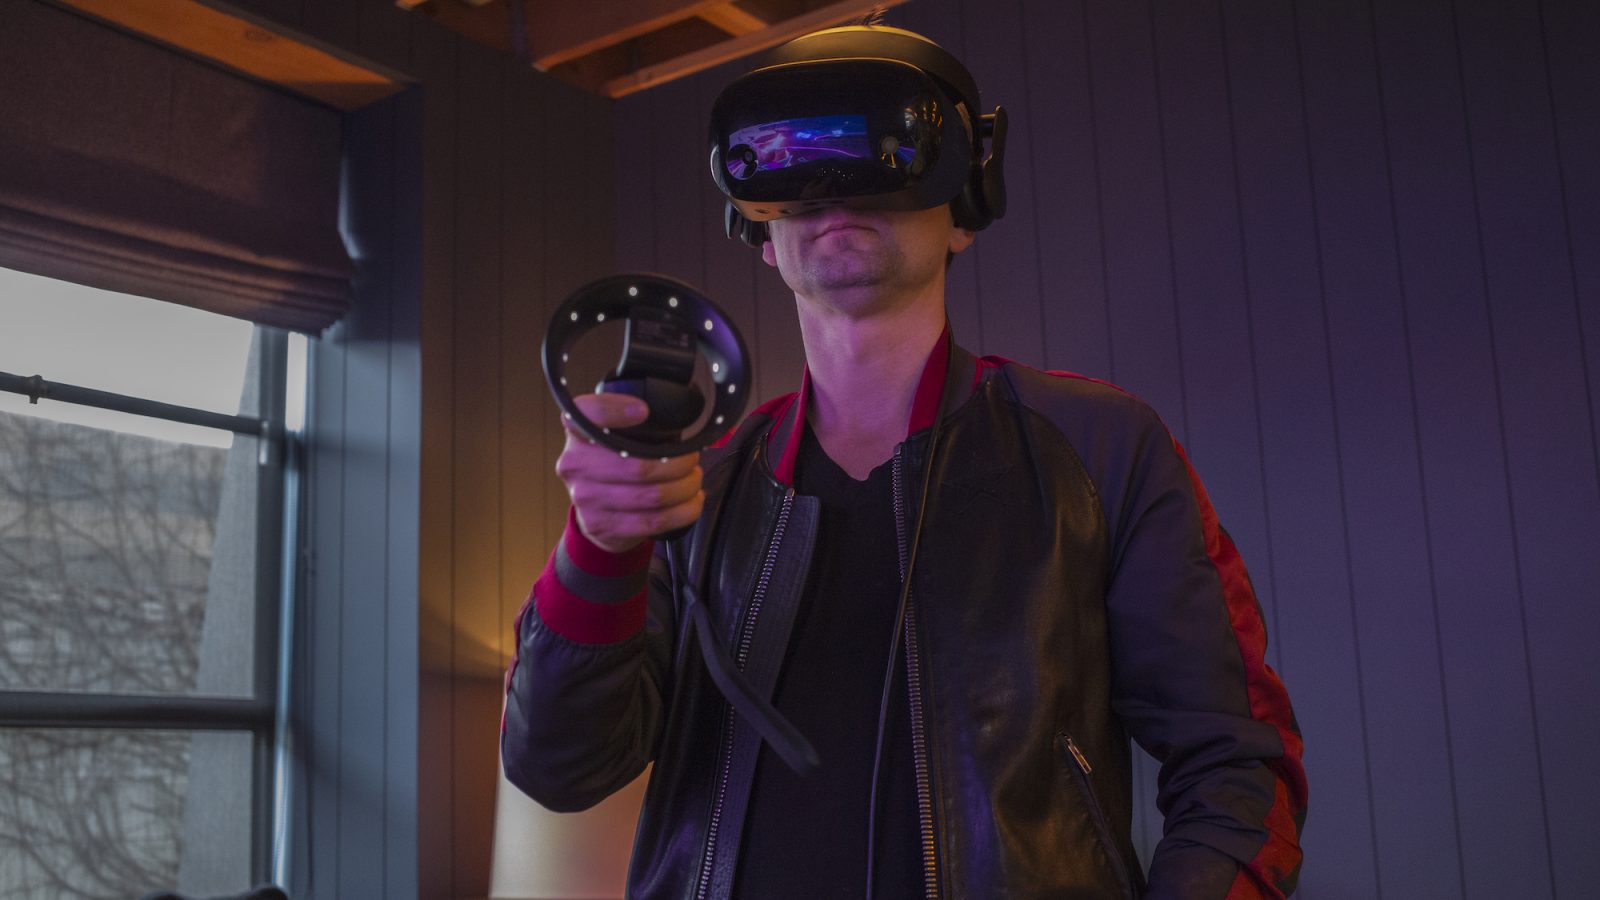 Photograph of a user wearing an immersive headset and holding a motion controller.